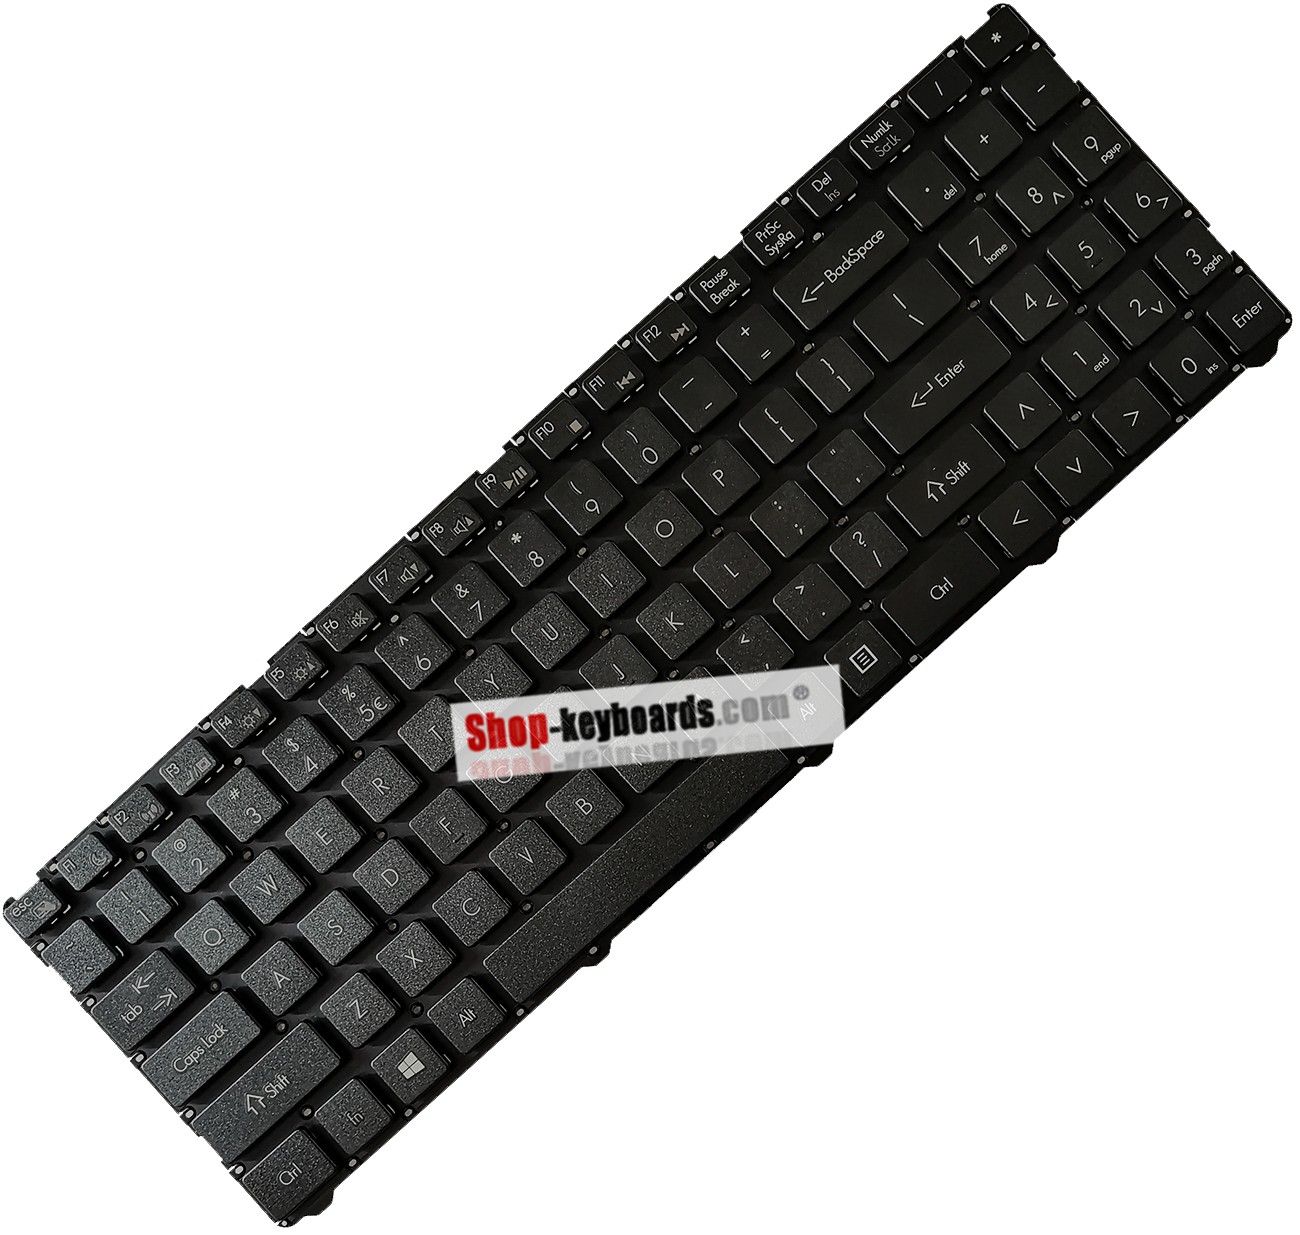 LG MP-12K73DO-9207 Keyboard replacement